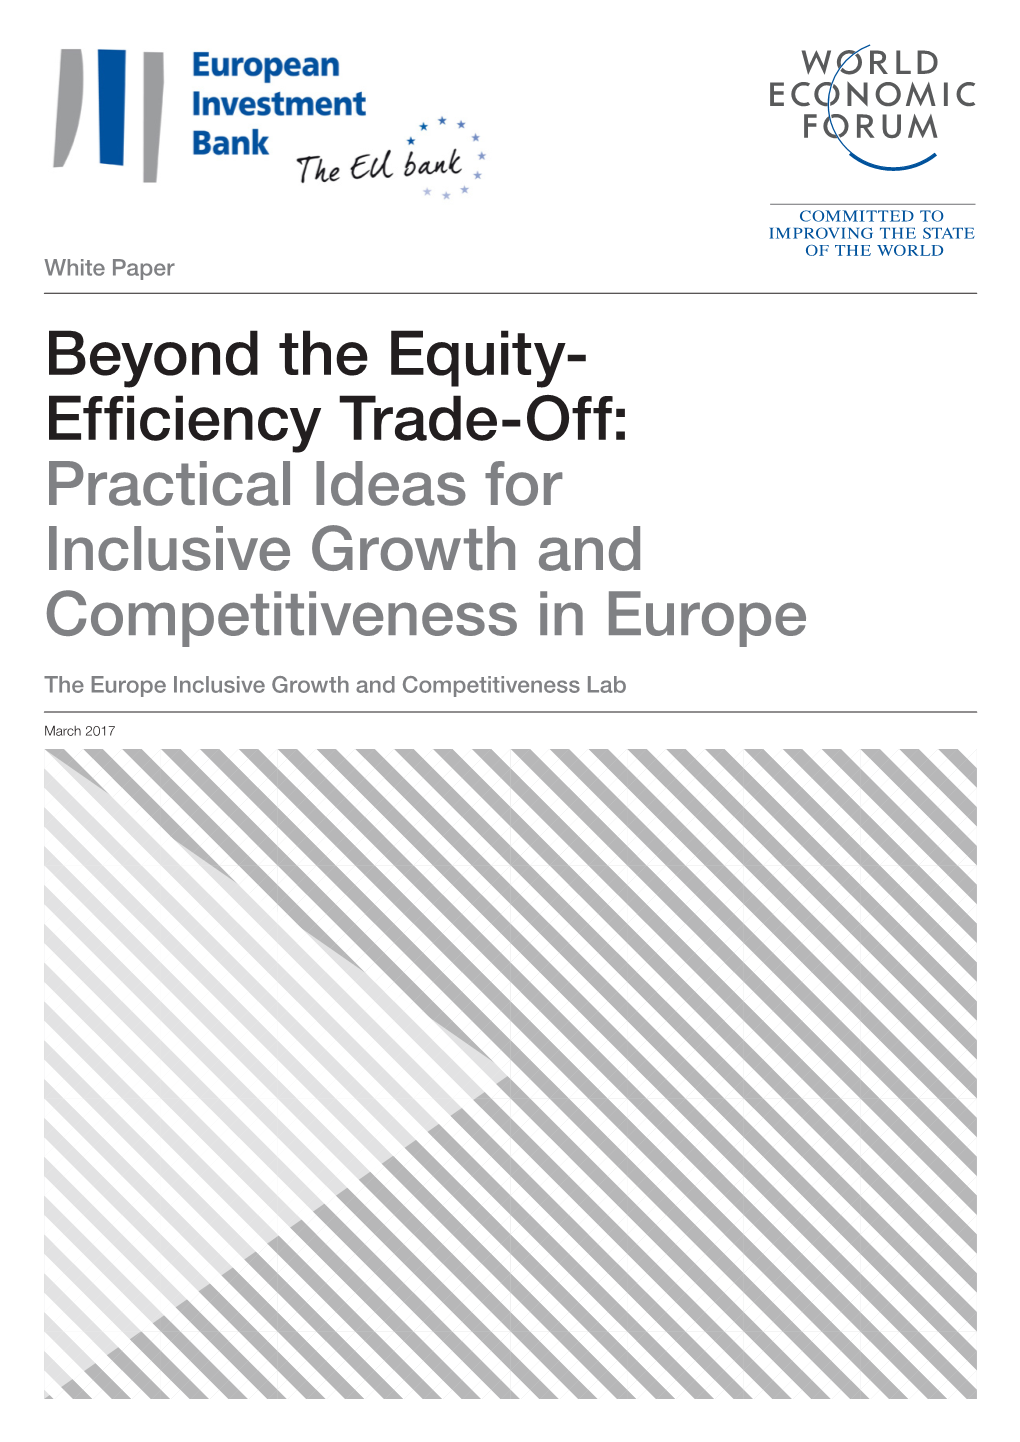 Practical Ideas for Inclusive Growth and Competitiveness in Europe